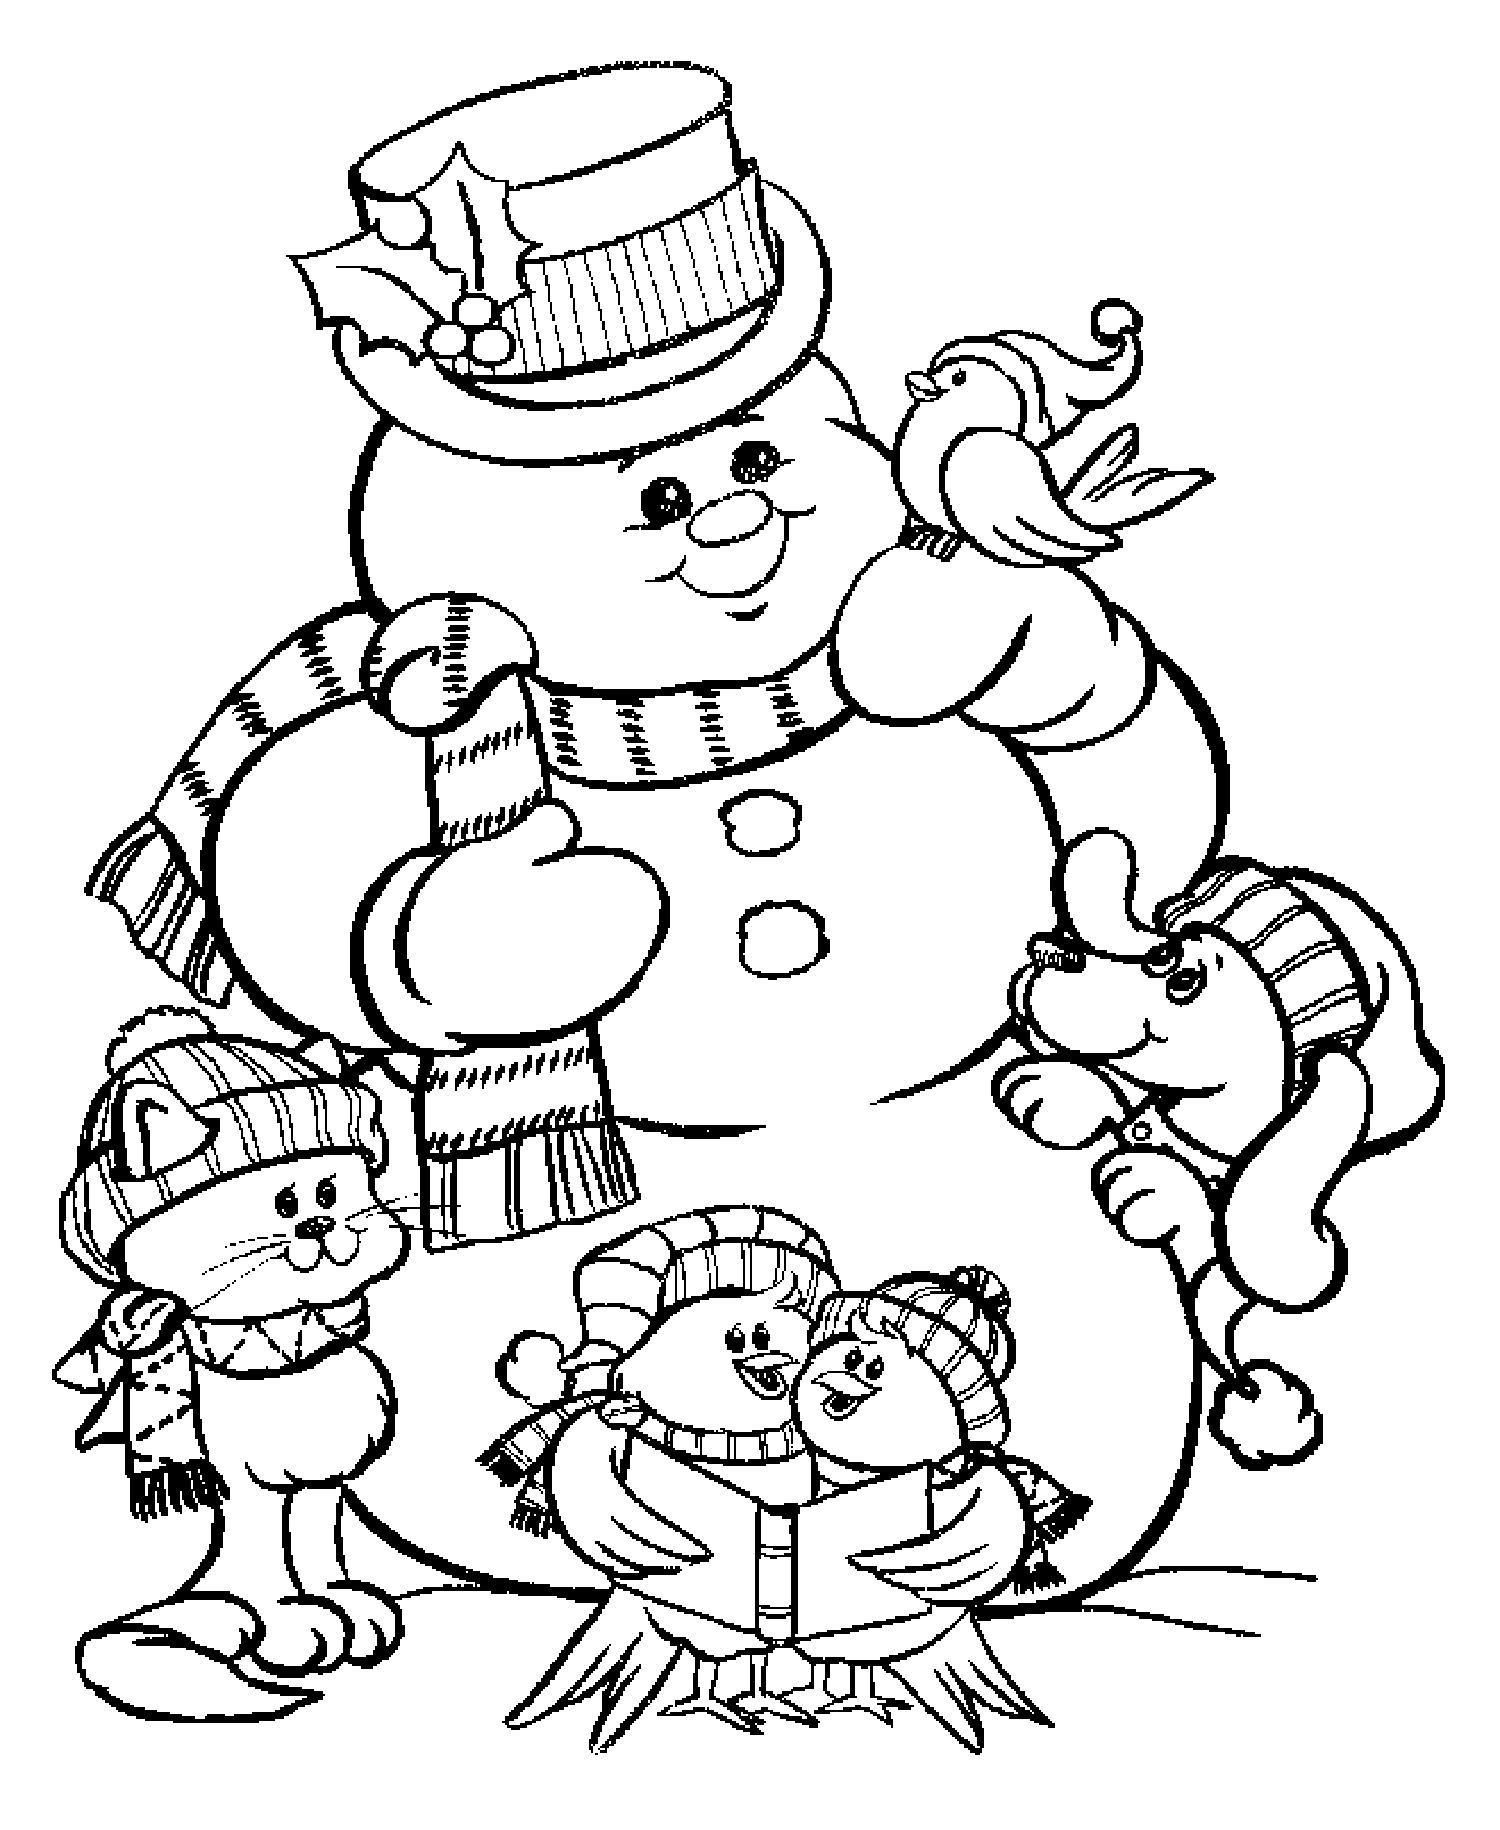 snowman-christmas-coloring-pages-for-kids-to-print-color